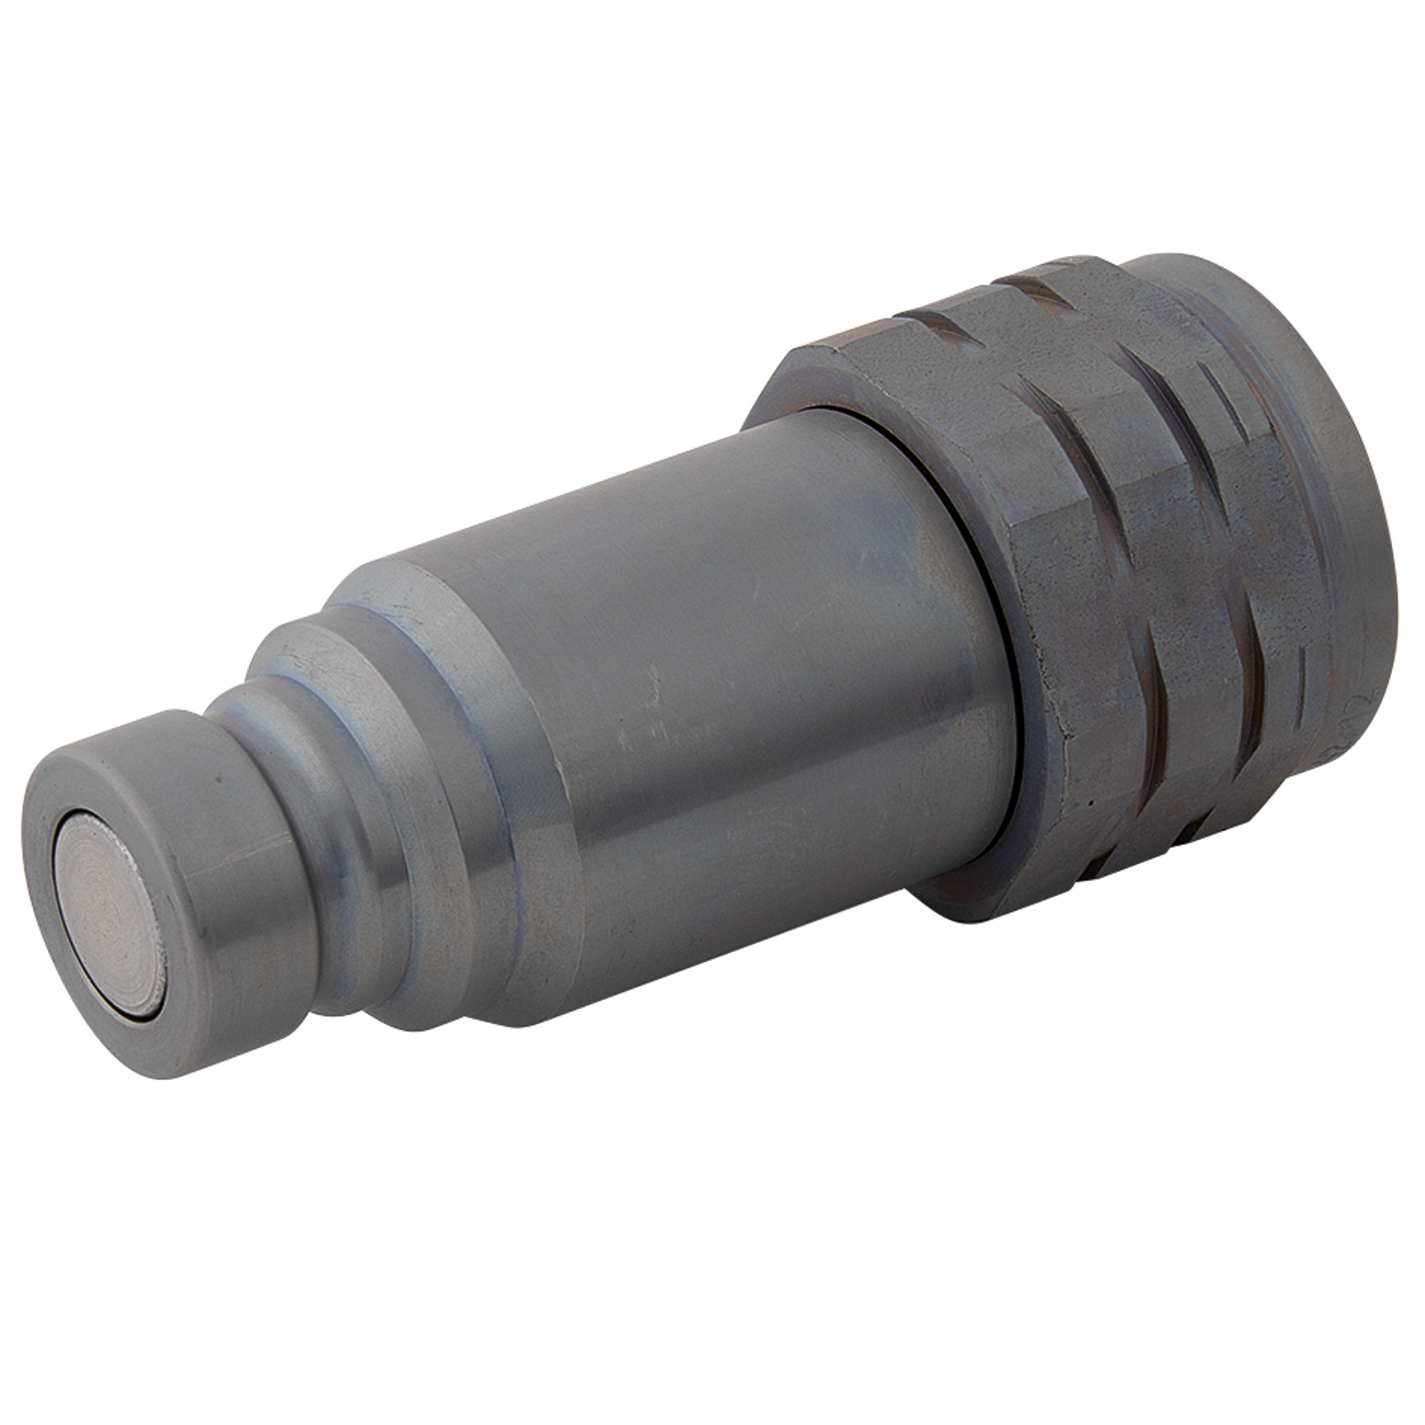 3/8" BSPP Female Flat Faced Coupling